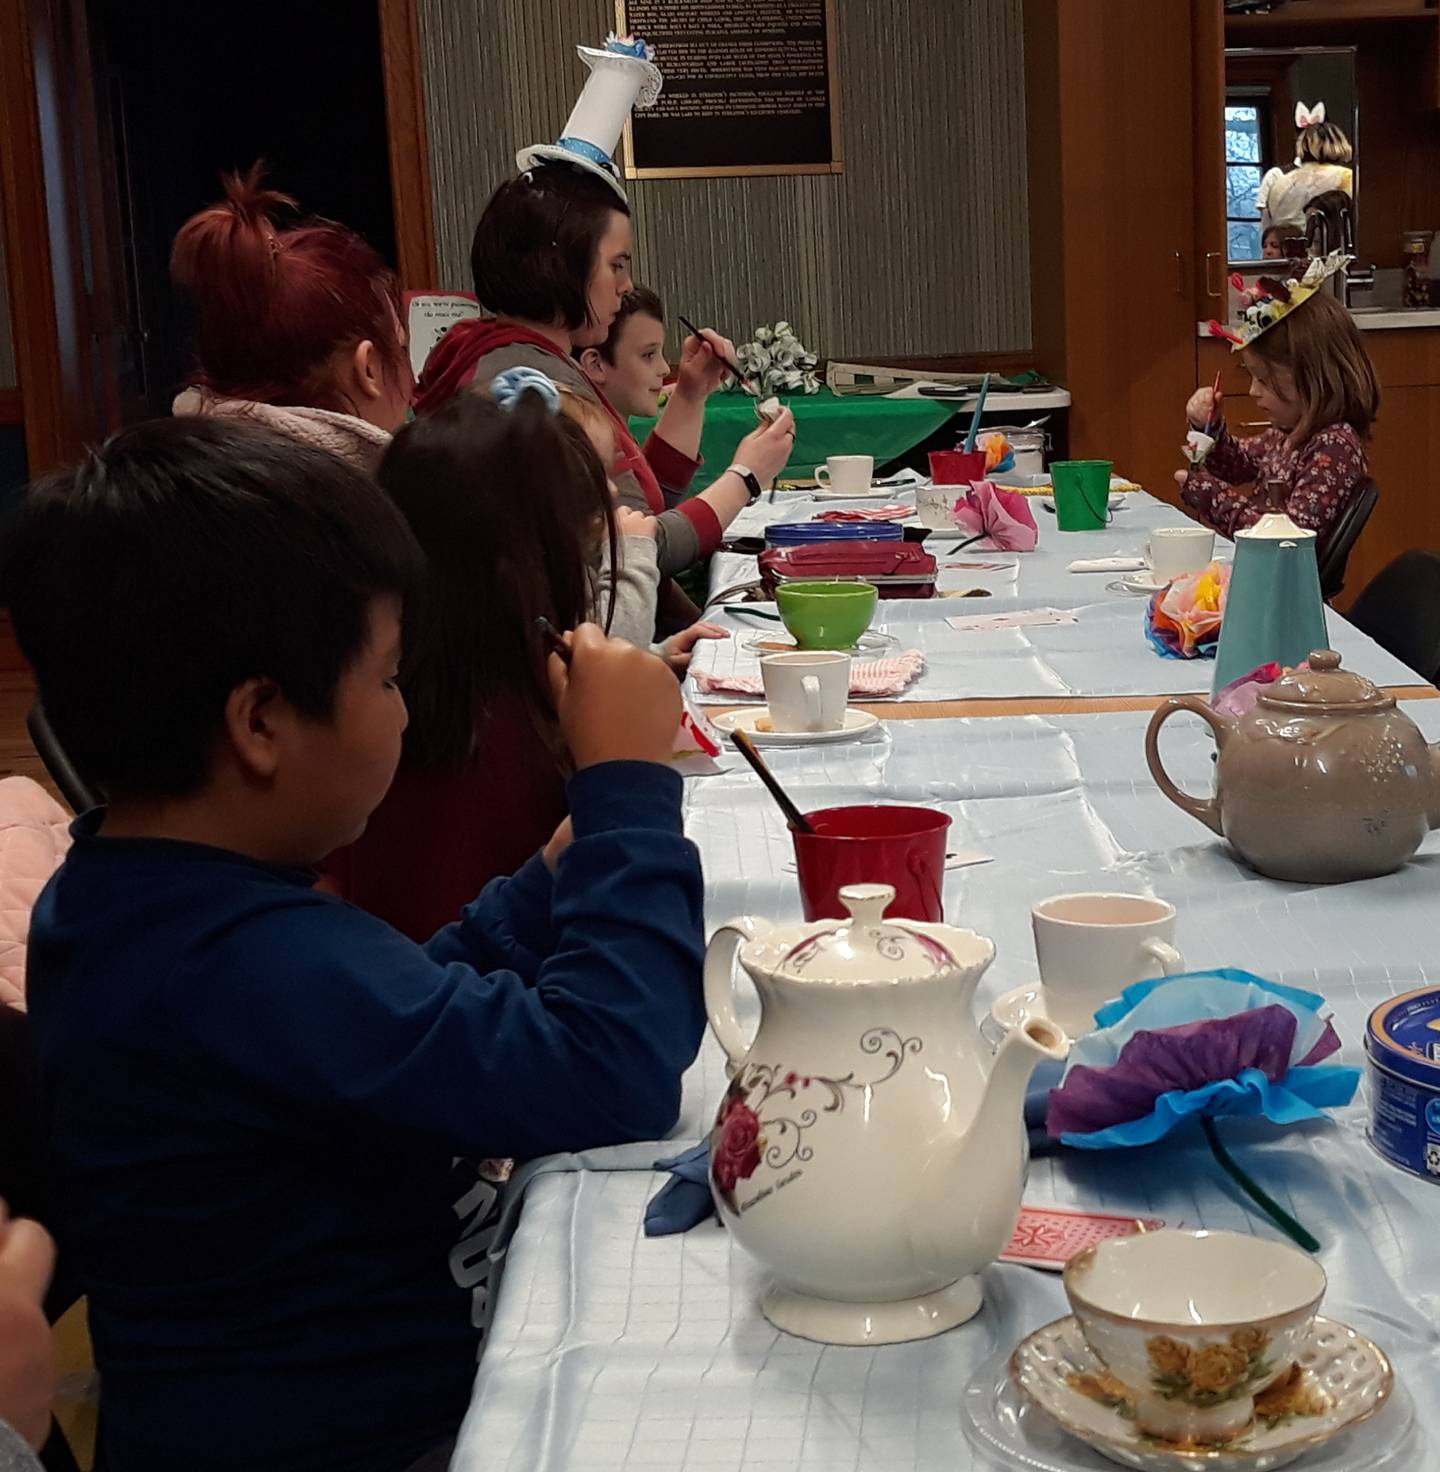 More than a dozen families participated in the Mad Hatter's Tea Party, Friday, March 19, 2021, in the newly-renovated Soderstrom Room at the Streator Public Library.